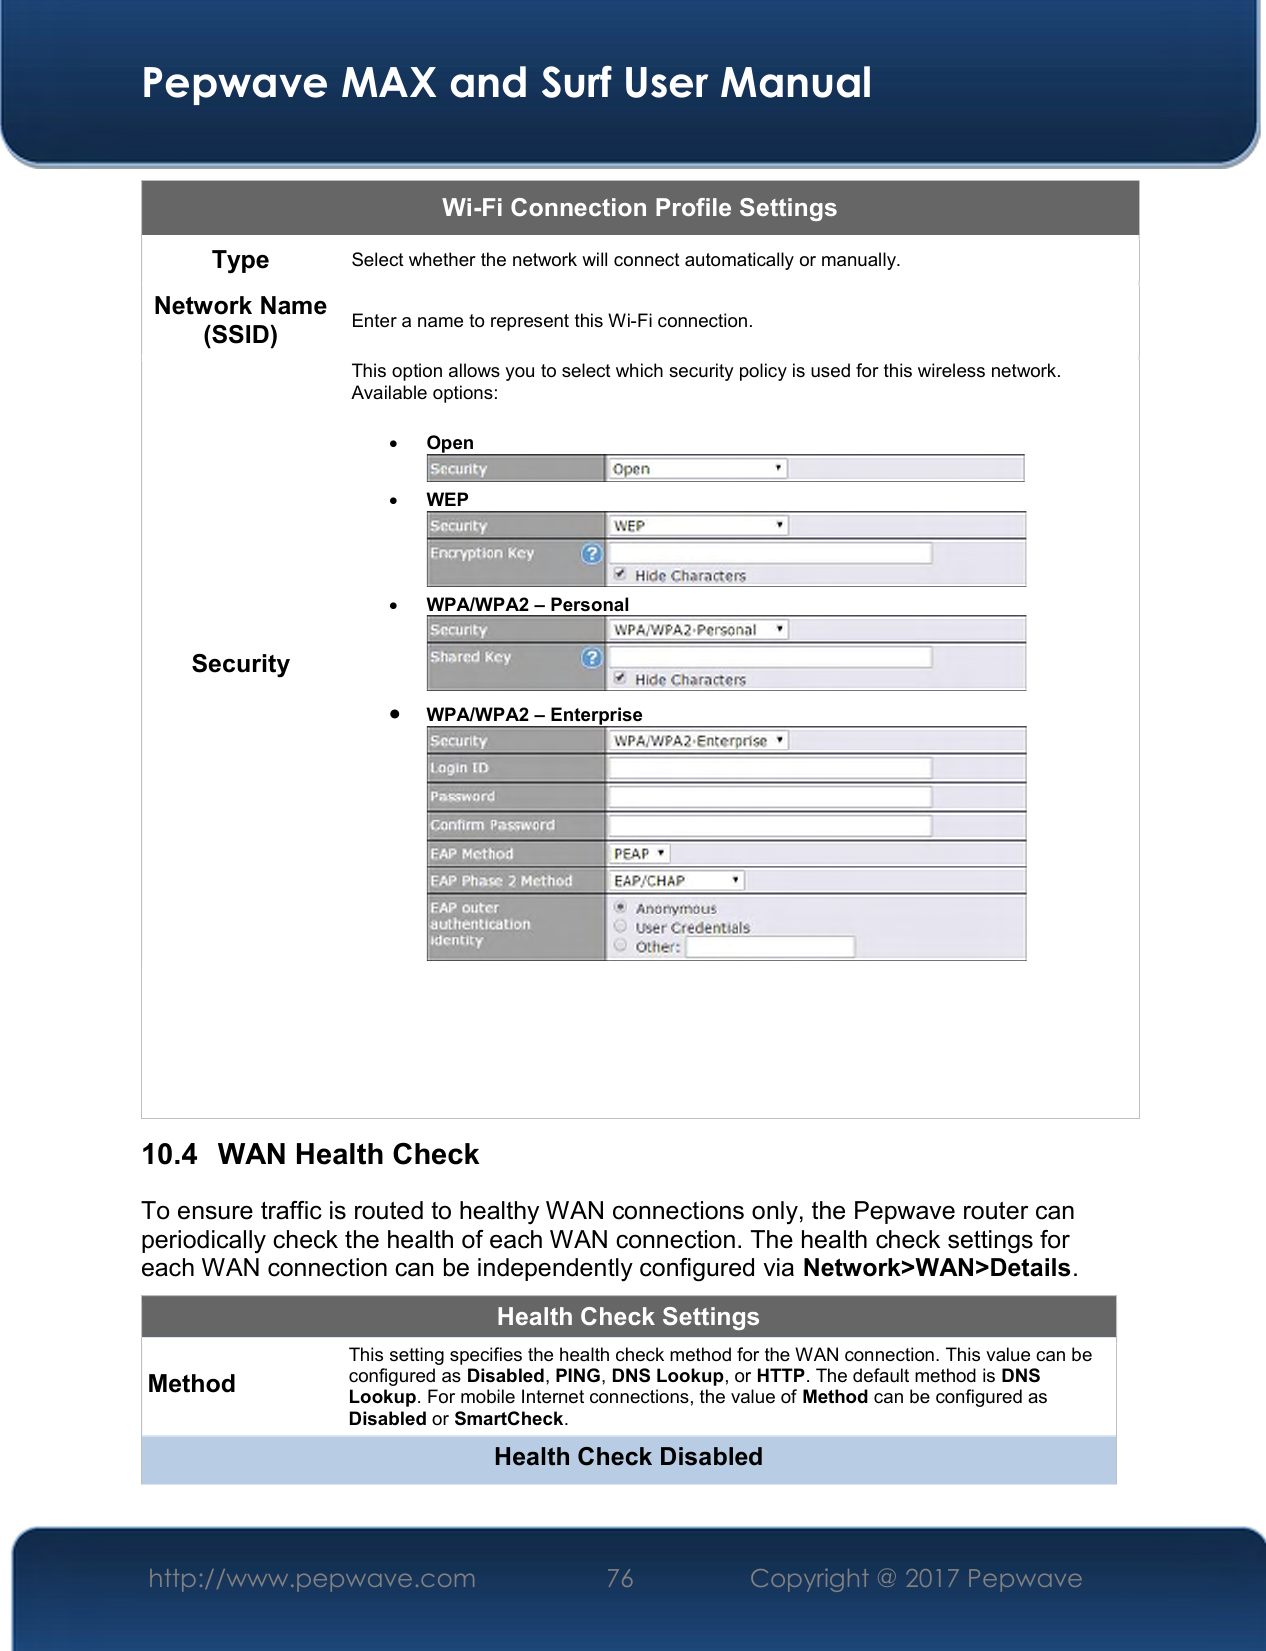  Pepwave MAX and Surf User Manual http://www.pepwave.com  76    Copyright @ 2017 Pepwave   Wi-Fi Connection Profile Settings Type  Select whether the network will connect automatically or manually. Network Name (SSID)  Enter a name to represent this Wi-Fi connection. Security This option allows you to select which security policy is used for this wireless network.   Available options:   Open   WEP   WPA/WPA2 – Personal   WPA/WPA2 – Enterprise       10.4  WAN Health Check To ensure traffic is routed to healthy WAN connections only, the Pepwave router can periodically check the health of each WAN connection. The health check settings for each WAN connection can be independently configured via Network&gt;WAN&gt;Details. Health Check Settings Method This setting specifies the health check method for the WAN connection. This value can be configured as Disabled, PING, DNS Lookup, or HTTP. The default method is DNS Lookup. For mobile Internet connections, the value of Method can be configured as Disabled or SmartCheck. Health Check Disabled 